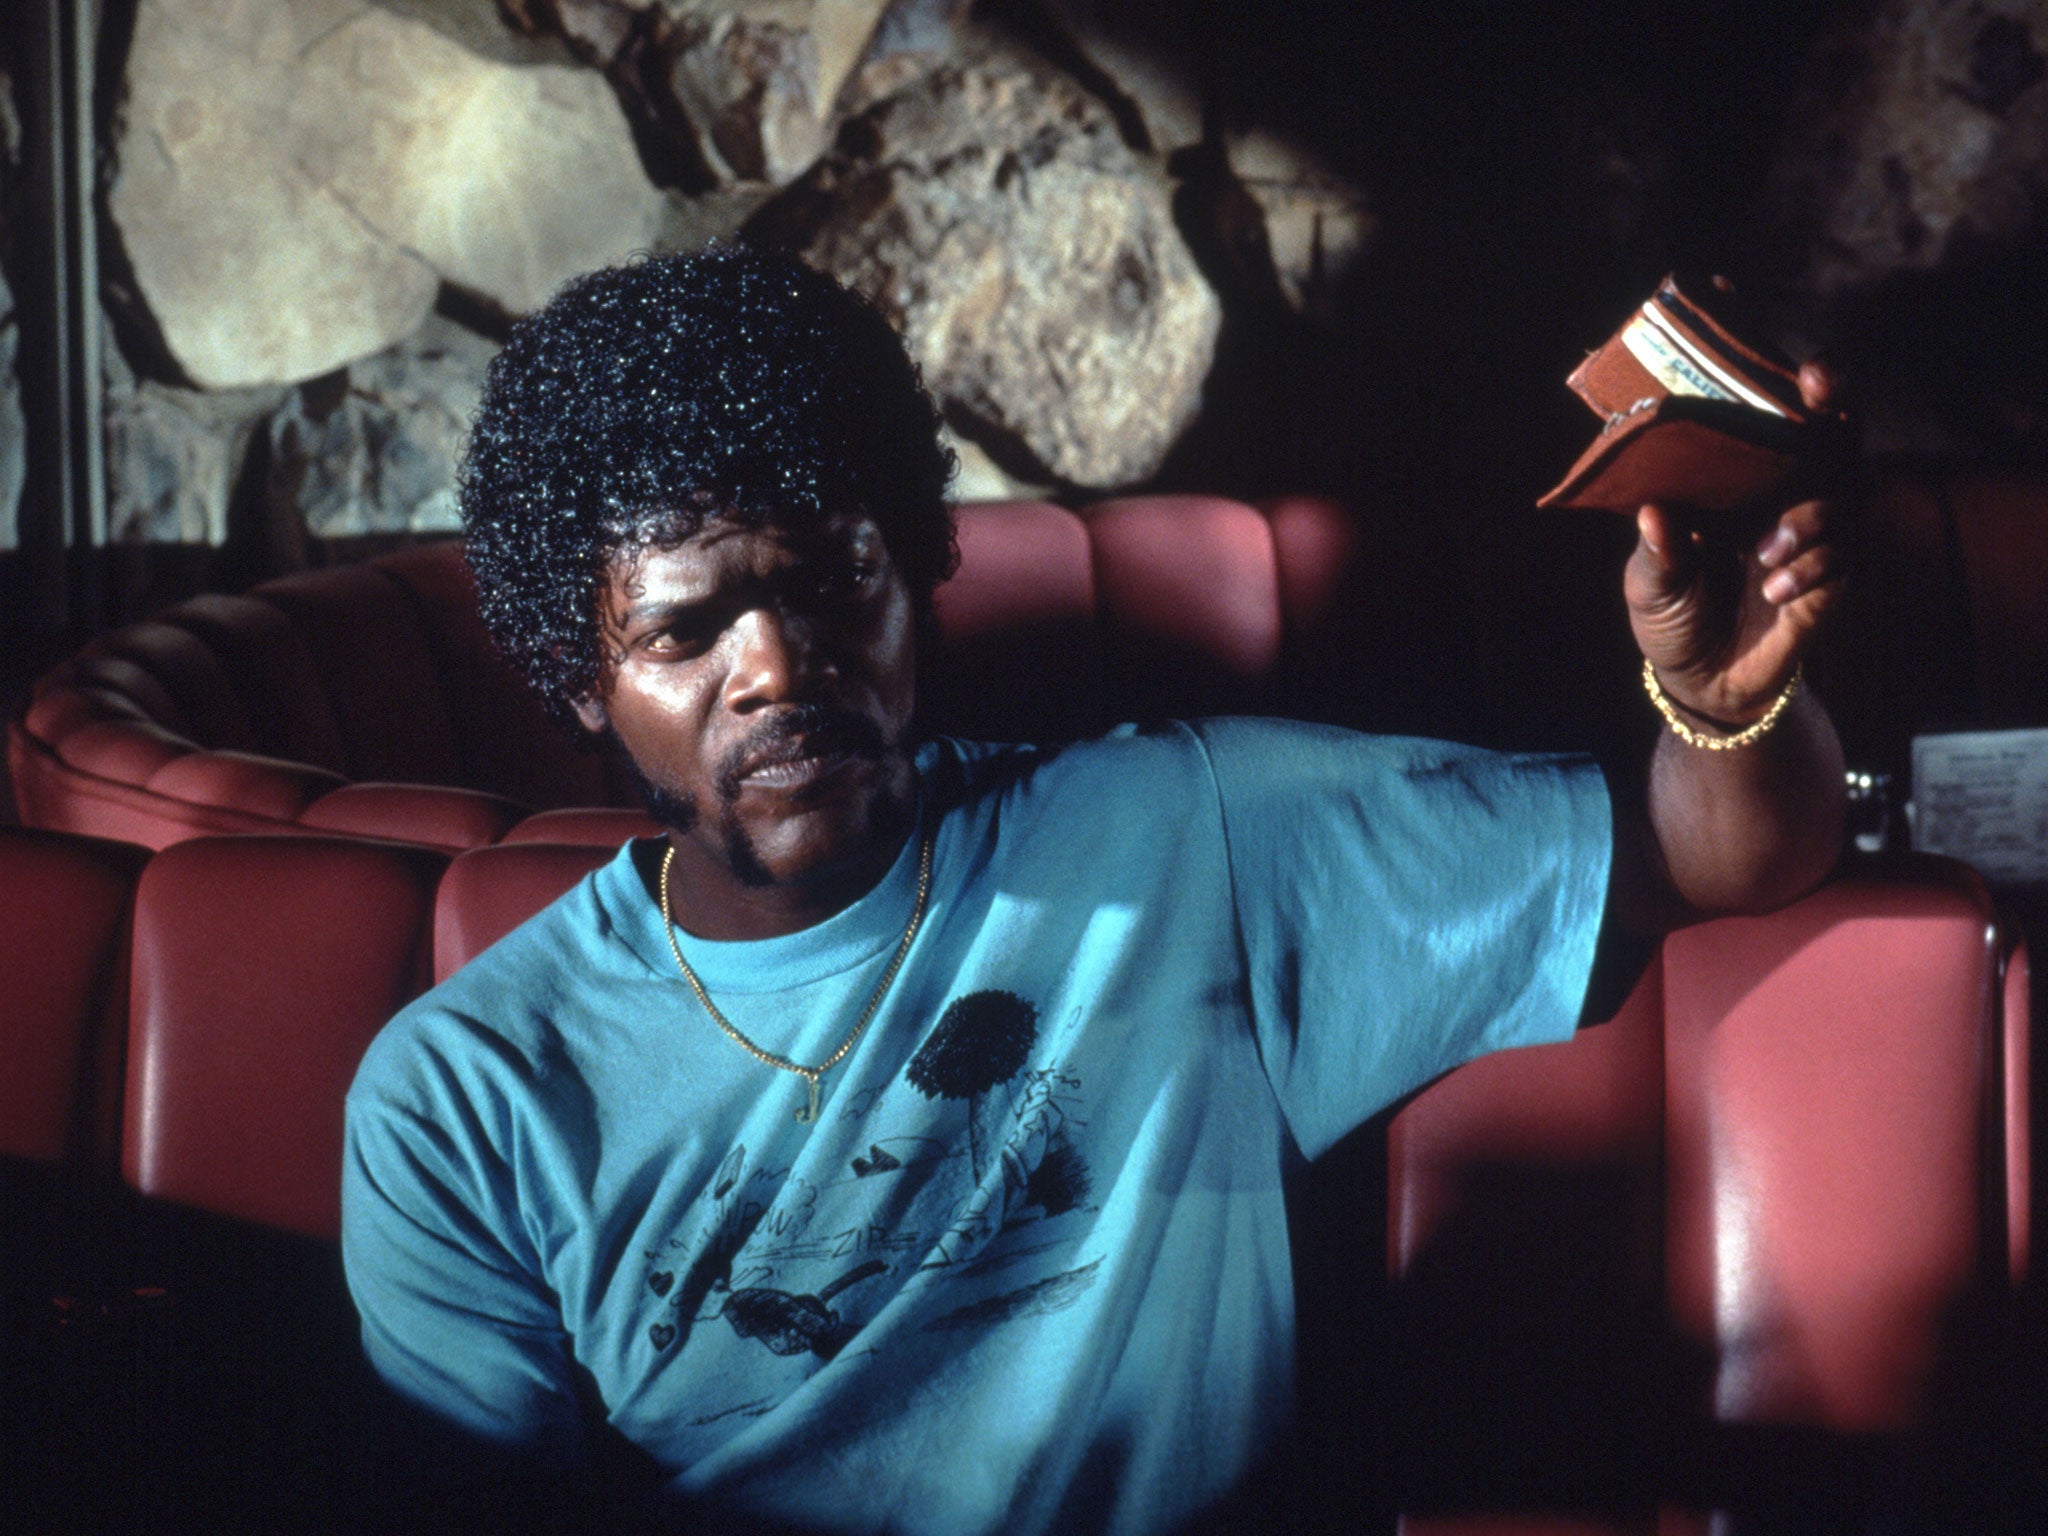 Jackson’s role as Jules Winnfield in Quentin Tarantino’s 1994 classic ‘Pulp Fiction’ remains one of his most iconic